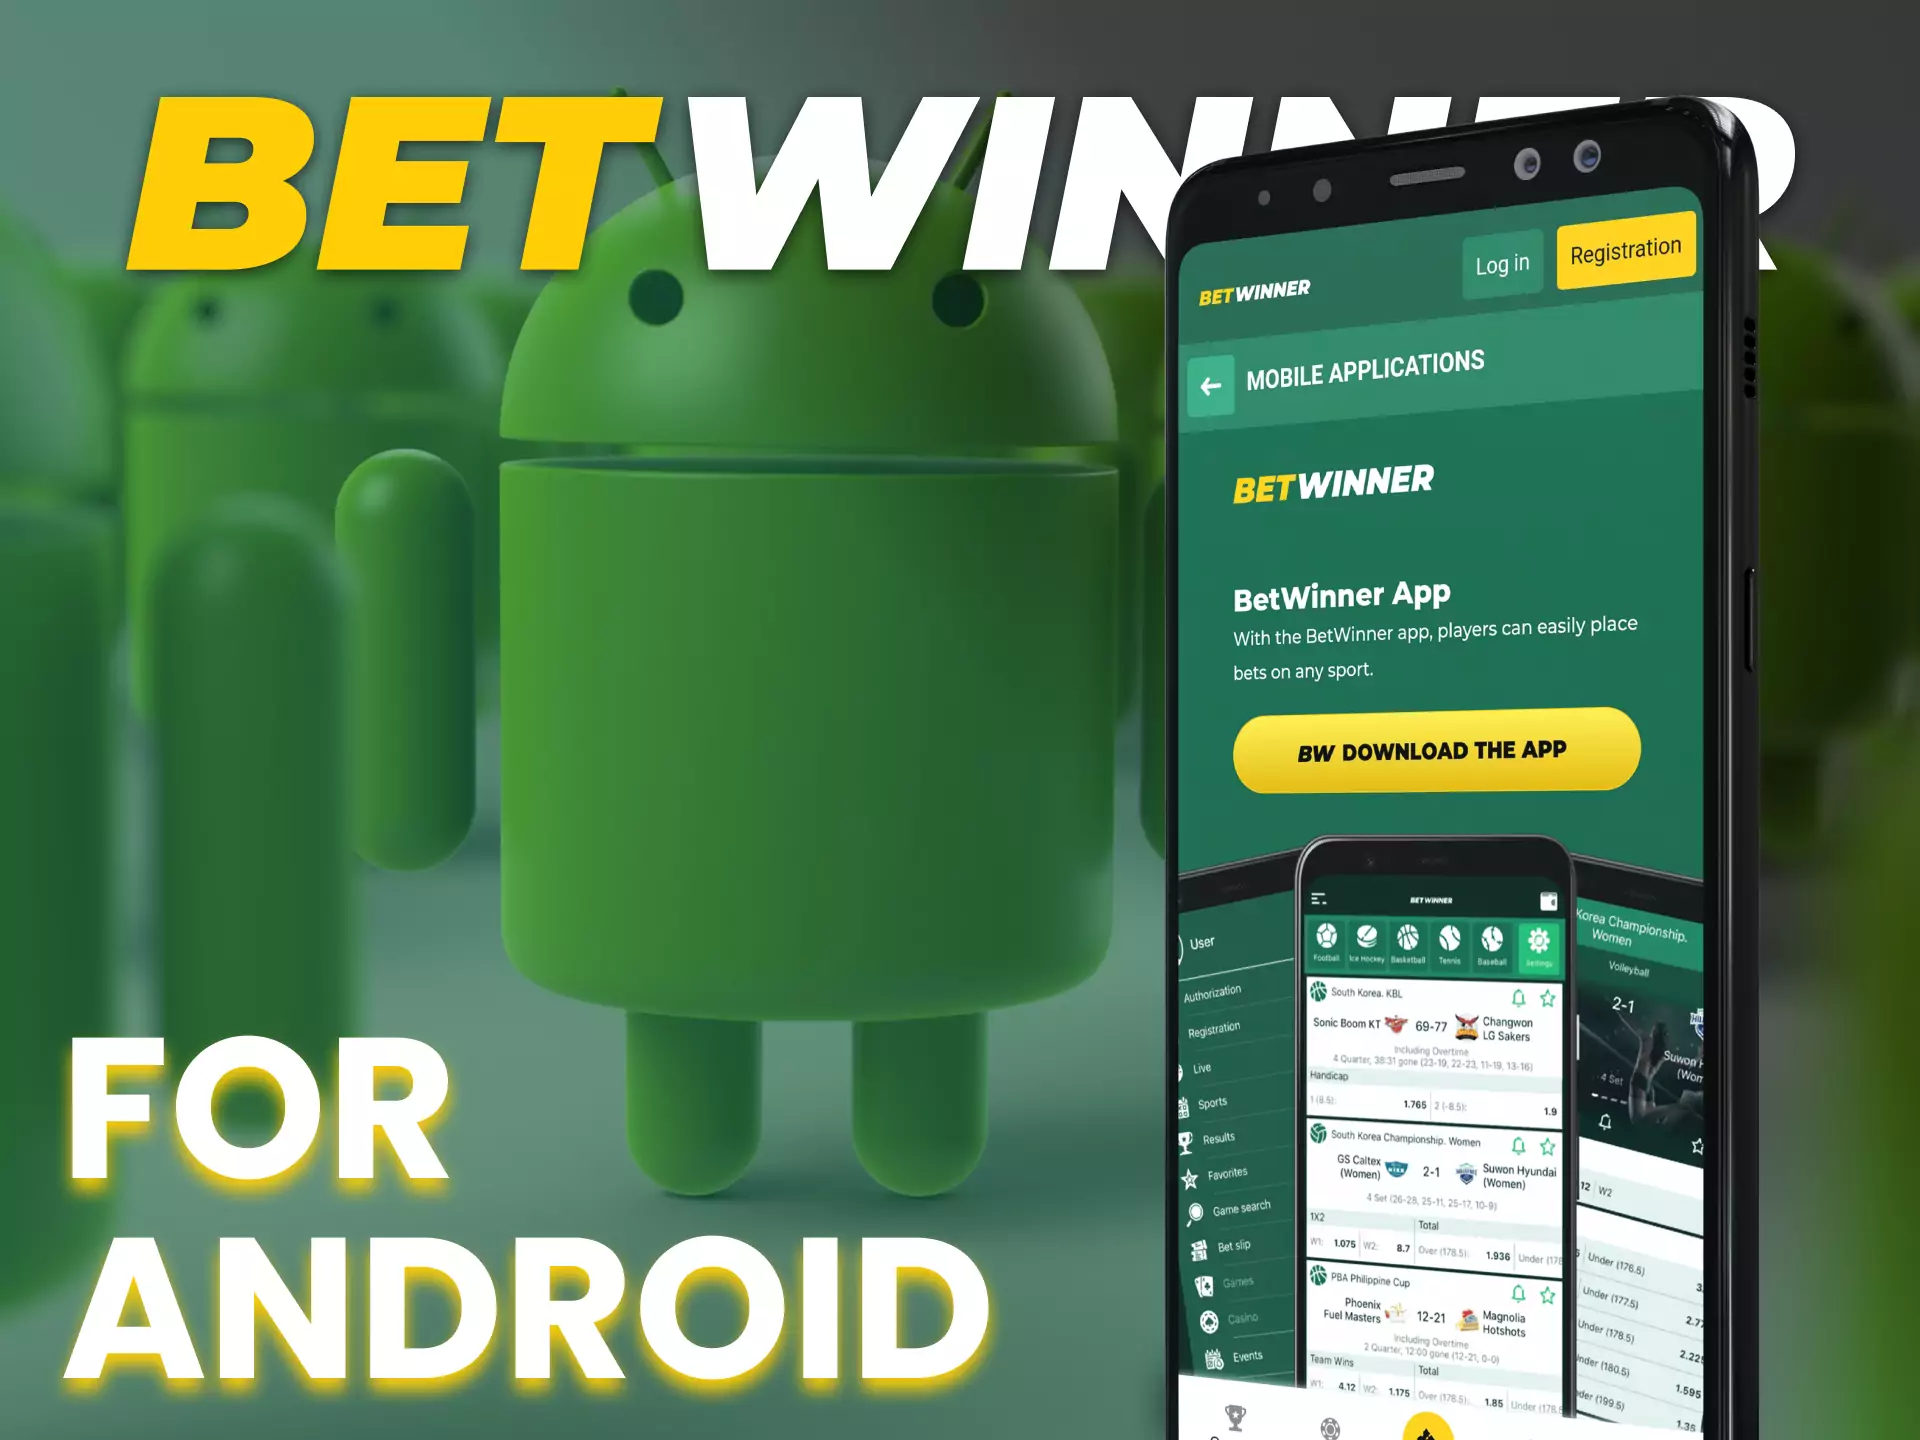 17 Tricks About Betwinner Indir APK You Wish You Knew Before